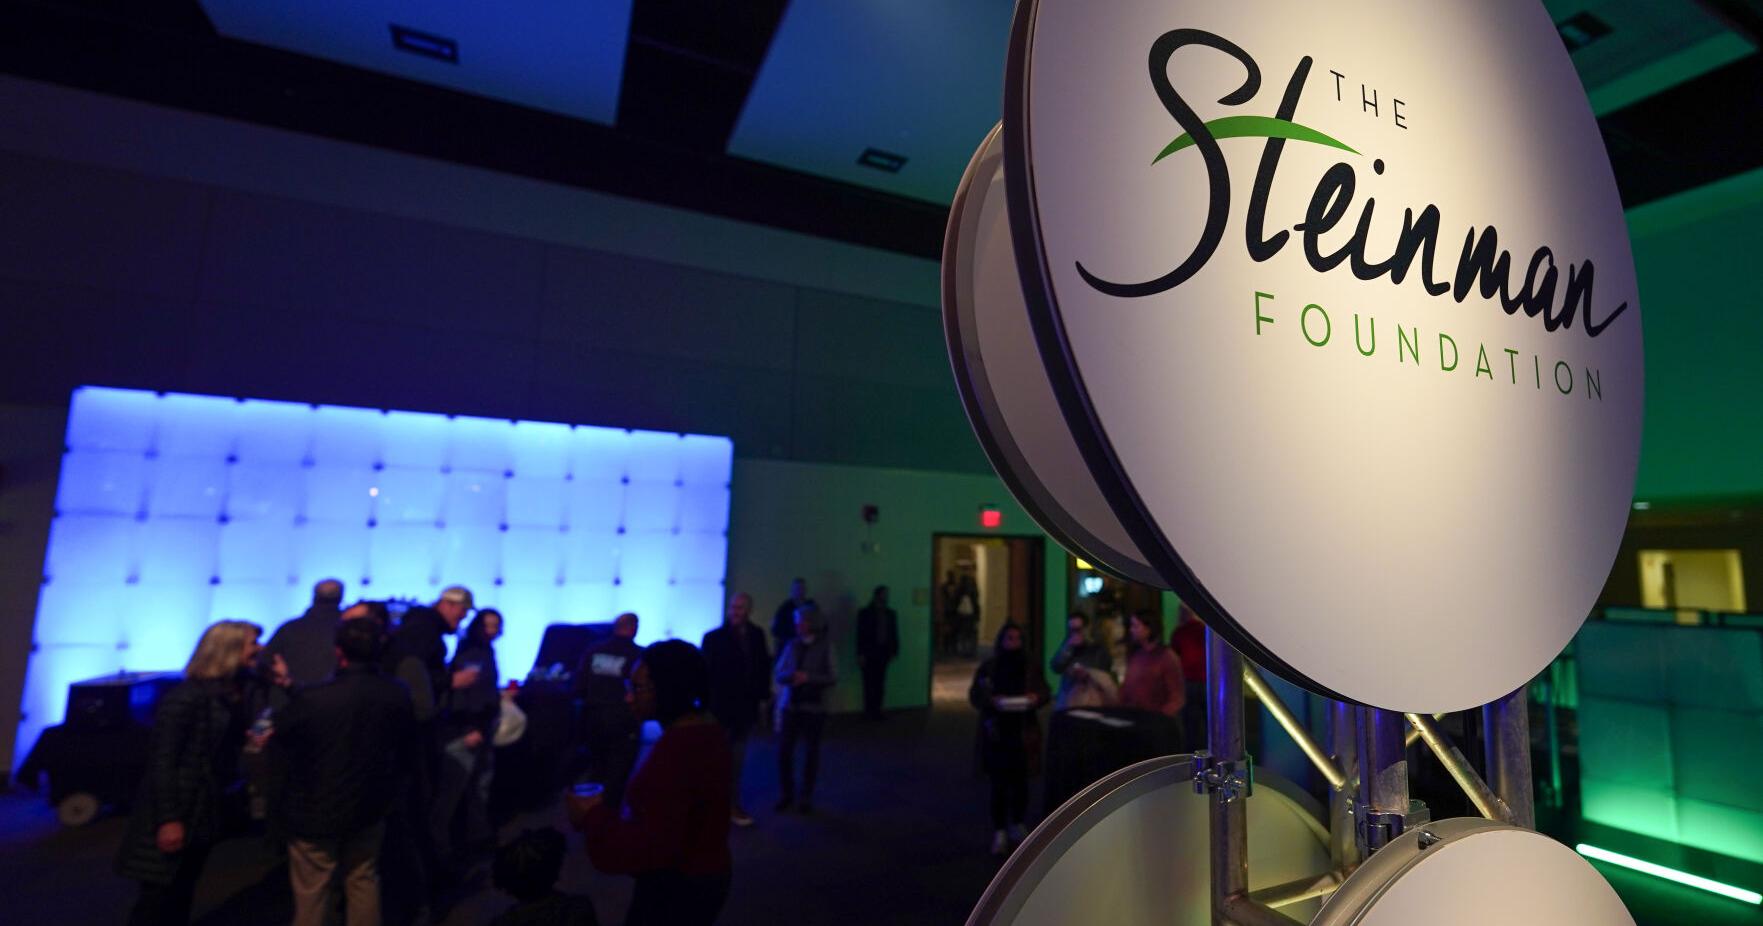 Steinman and Touchstone Foundations team up to offer more than $285,000 in scholarships